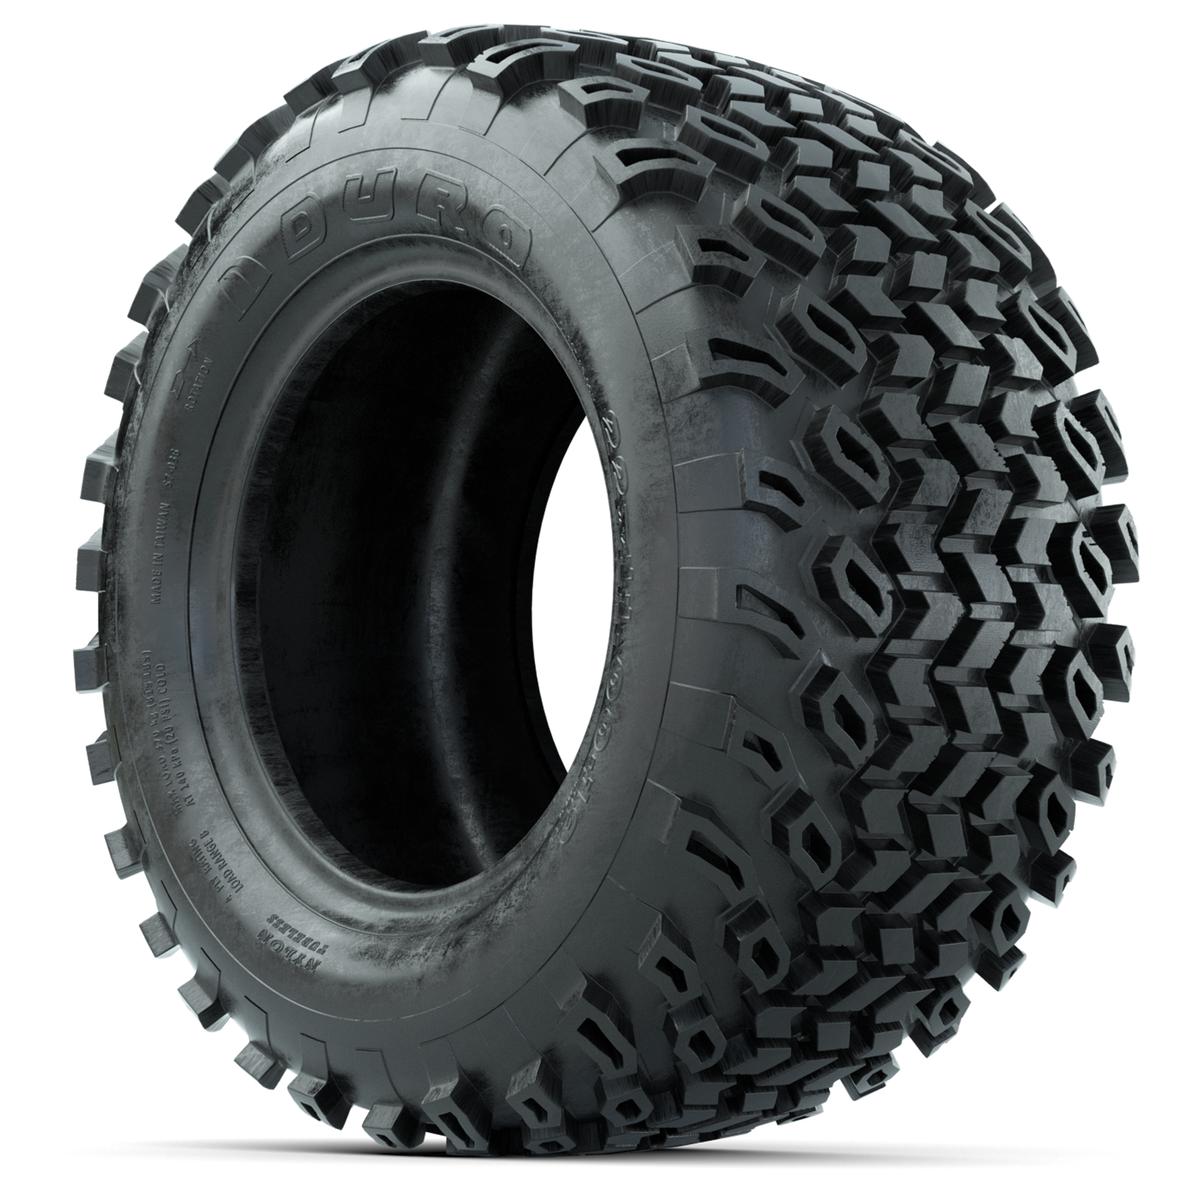 22x11-12 DURO Desert A/T Tire (Lift Required)